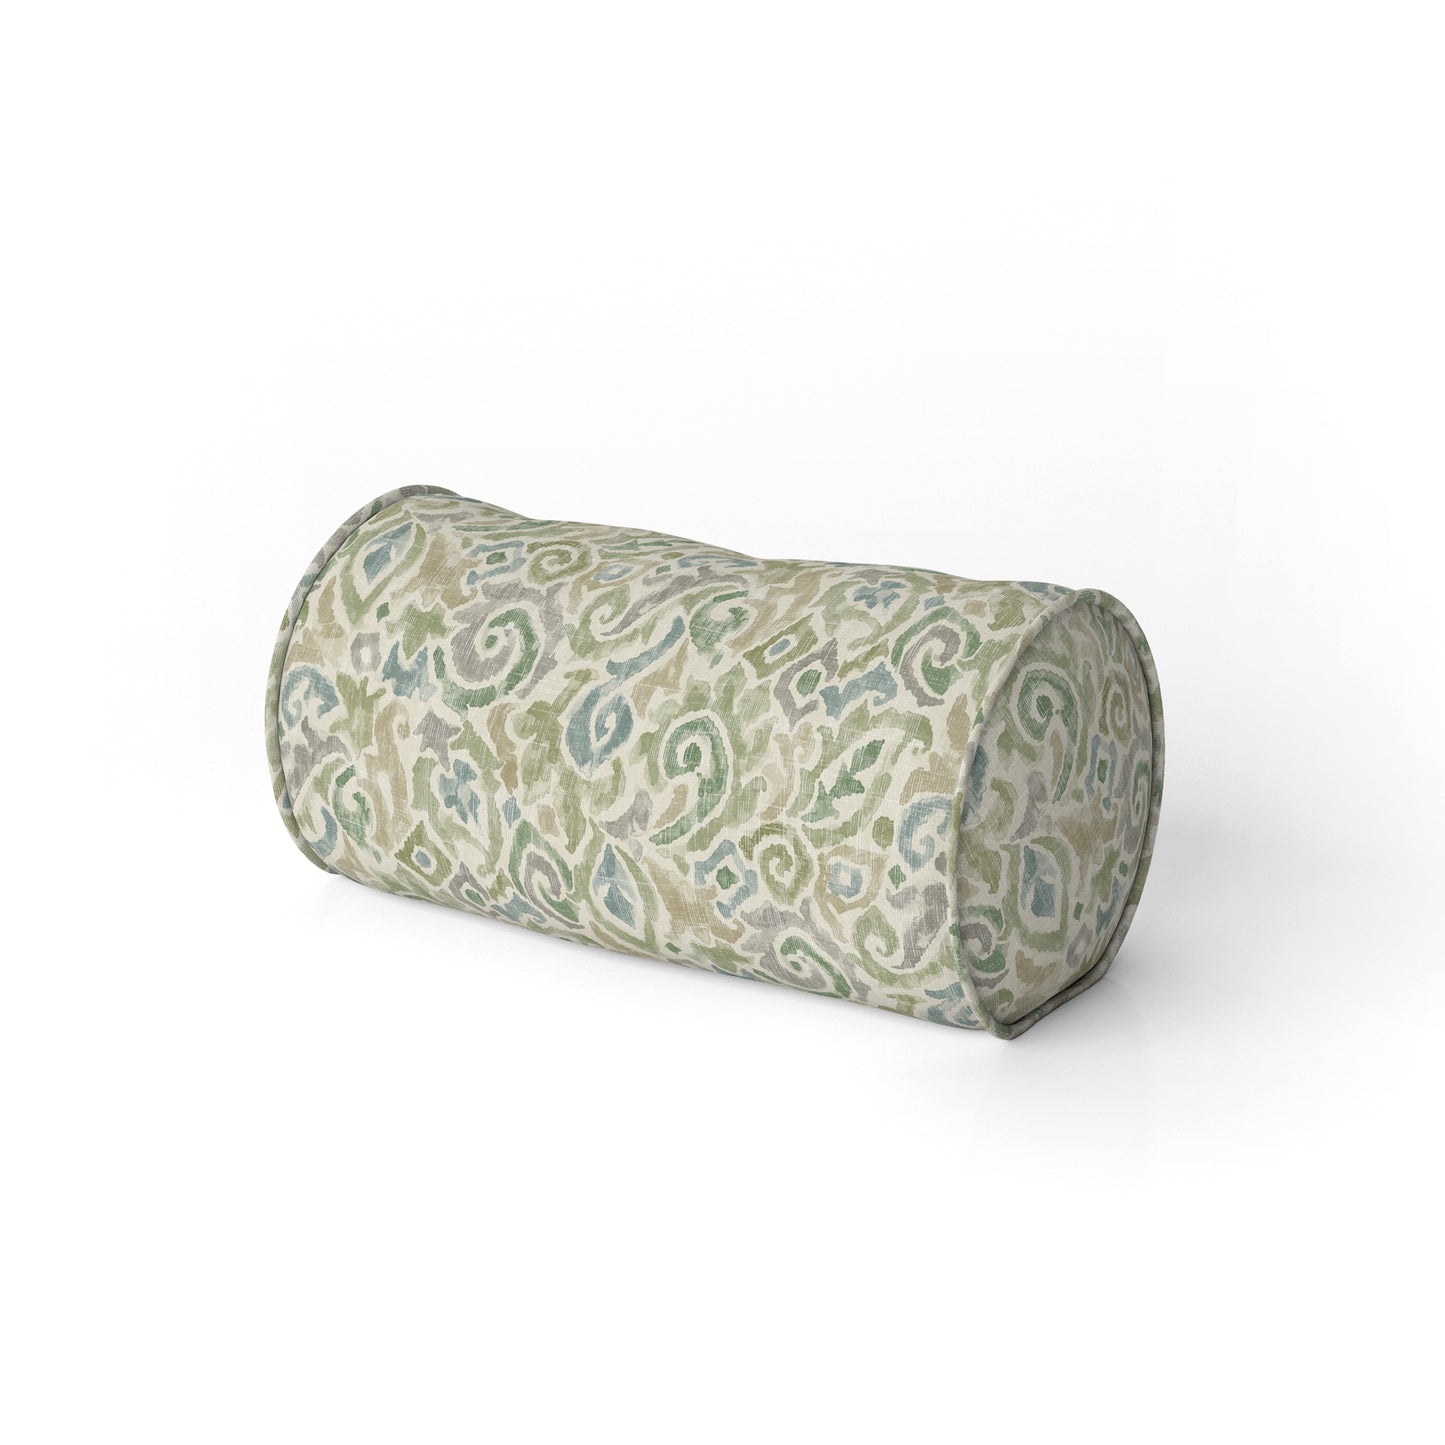 Decorative Pillows in Jester Bay Green Paisley Watercolor